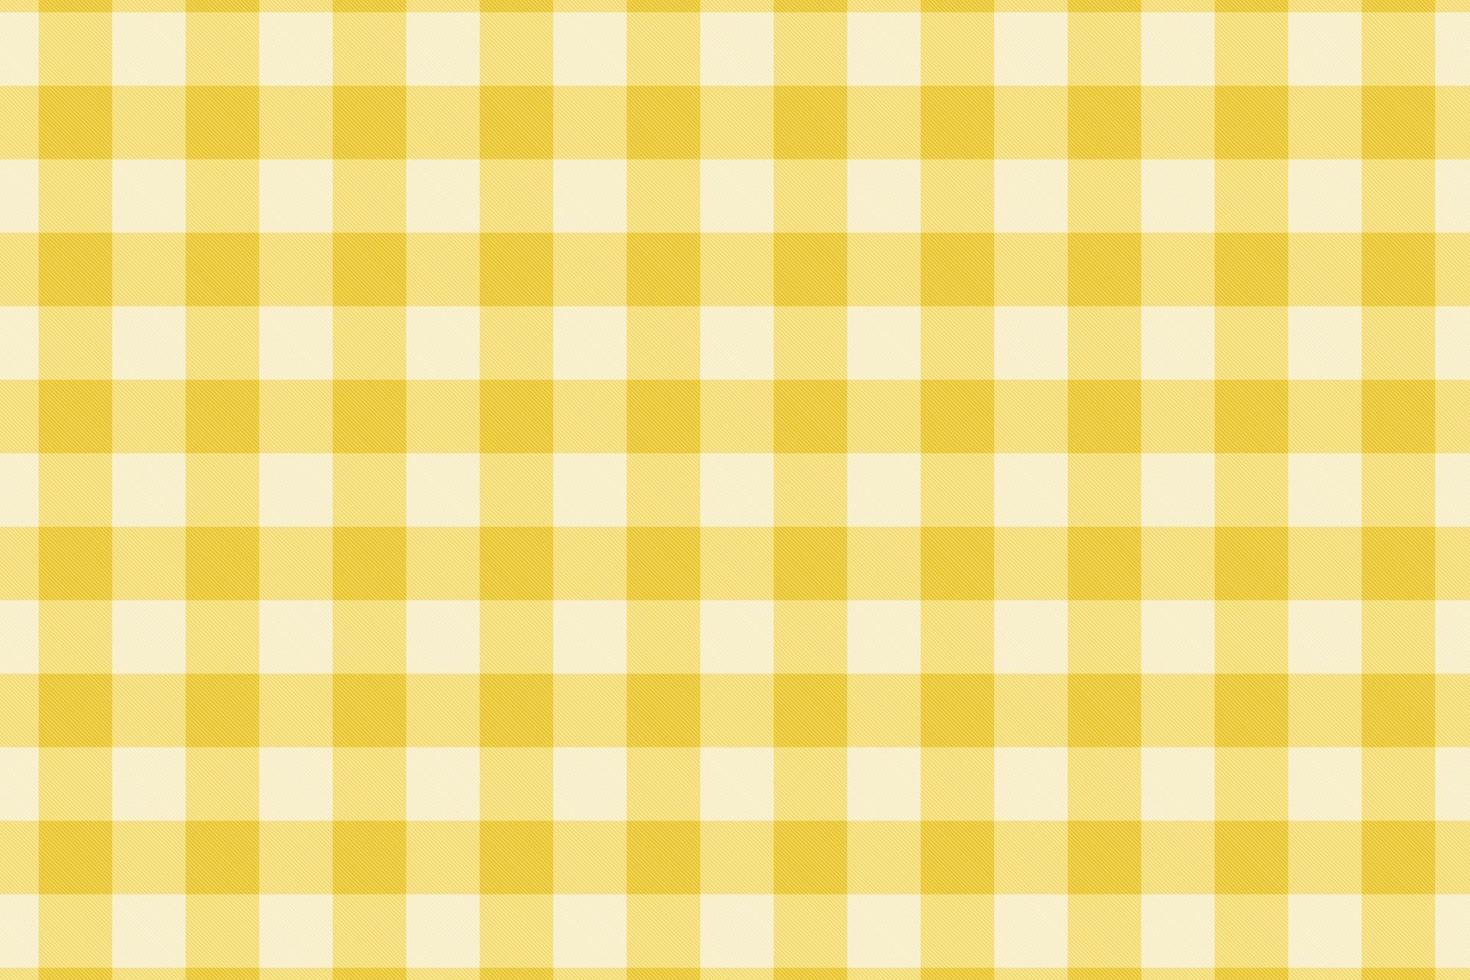 Abstract geometric pattern with yellow square grid and diagonal white lines, Yellow fabric  Background vector